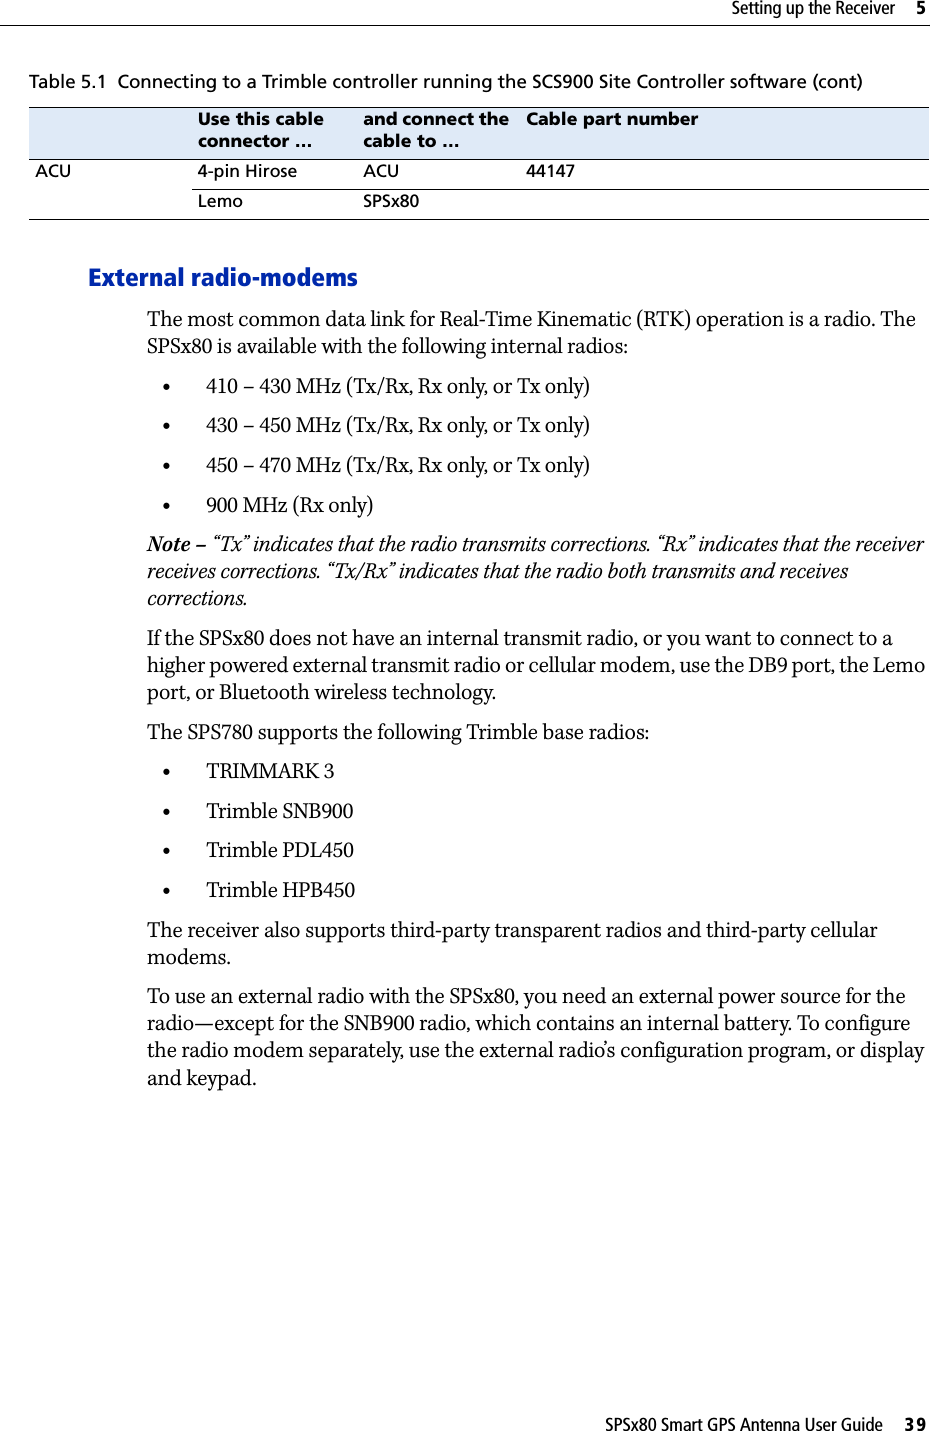 SPSx80 Smart GPS Antenna User Guide     39Setting up the Receiver     5External radio-modemsThe most common data link for Real-Time Kinematic (RTK) operation is a radio. The SPSx80 is available with the following internal radios:•410 – 430 MHz (Tx/Rx, Rx only, or Tx only)•430 – 450 MHz (Tx/Rx, Rx only, or Tx only)•450 – 470 MHz (Tx/Rx, Rx only, or Tx only)•900 MHz (Rx only)Note – “Tx” indicates that the radio transmits corrections. “Rx” indicates that the receiver receives corrections. “Tx/Rx” indicates that the radio both transmits and receives corrections.If the SPSx80 does not have an internal transmit radio, or you want to connect to a higher powered external transmit radio or cellular modem, use the DB9 port, the Lemo port, or Bluetooth wireless technology. The SPS780 supports the following Trimble base radios:•TRIMMARK 3•Trimble SNB900•Trimble PDL450•Trimble HPB450The receiver also supports third-party transparent radios and third-party cellular modems.To use an external radio with the SPSx80, you need an external power source for the radio—except for the SNB900 radio, which contains an internal battery. To configure the radio modem separately, use the external radio’s configuration program, or display and keypad.ACU 4-pin Hirose ACU 44147Lemo SPSx80Table 5.1 Connecting to a Trimble controller running the SCS900 Site Controller software (cont)Use this cable connector …and connect the cable to …Cable part number